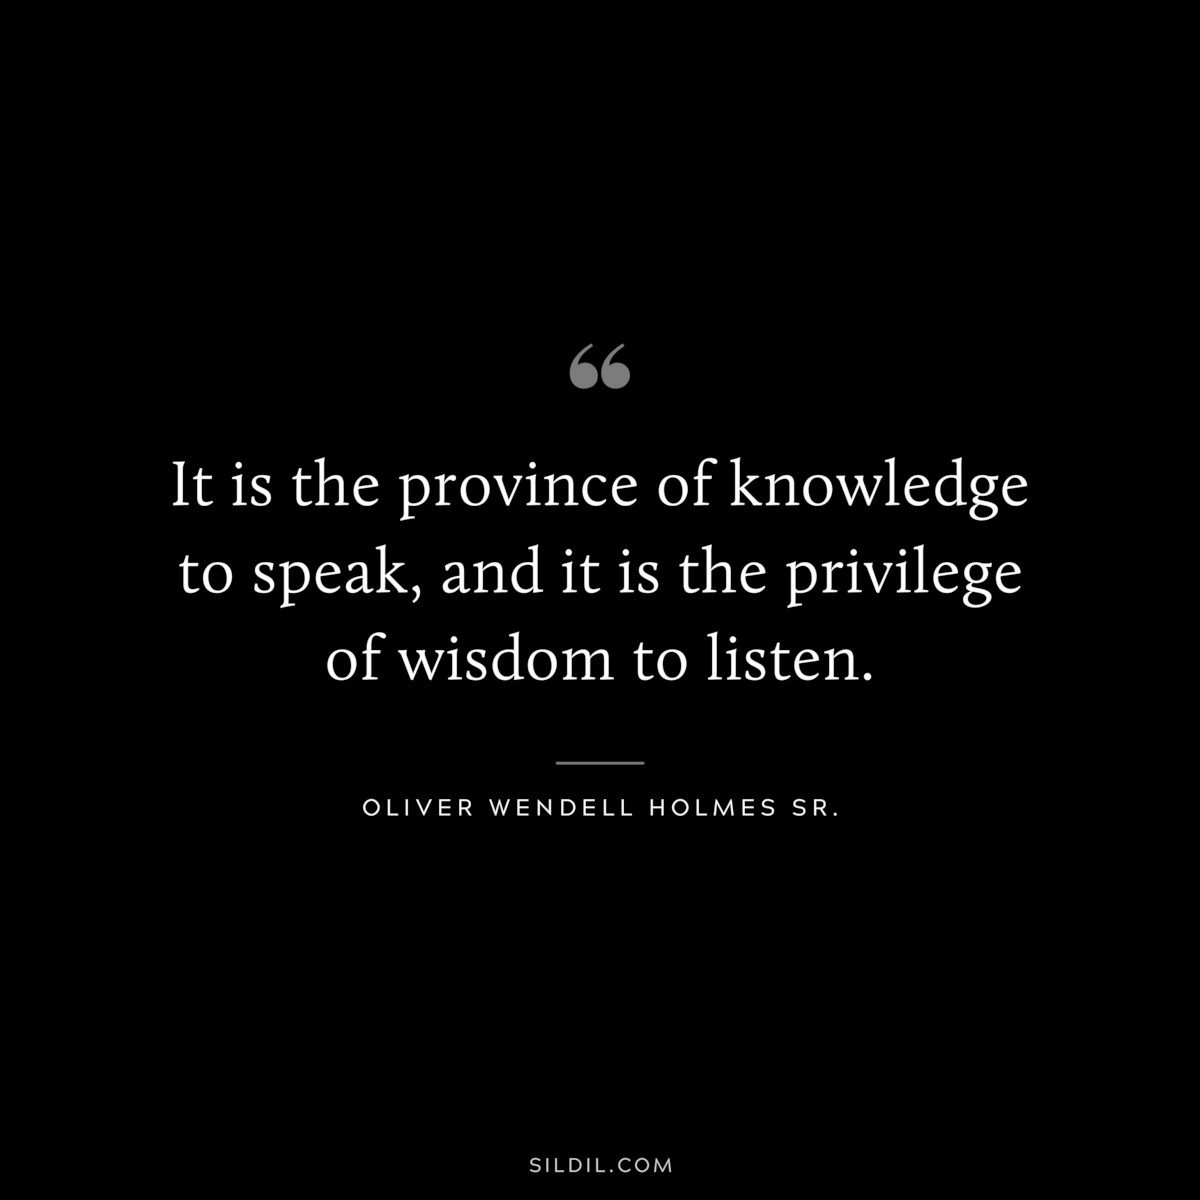 It is the province of knowledge to speak, and it is the privilege of wisdom to listen. ― Oliver Wendell Holmes Sr.